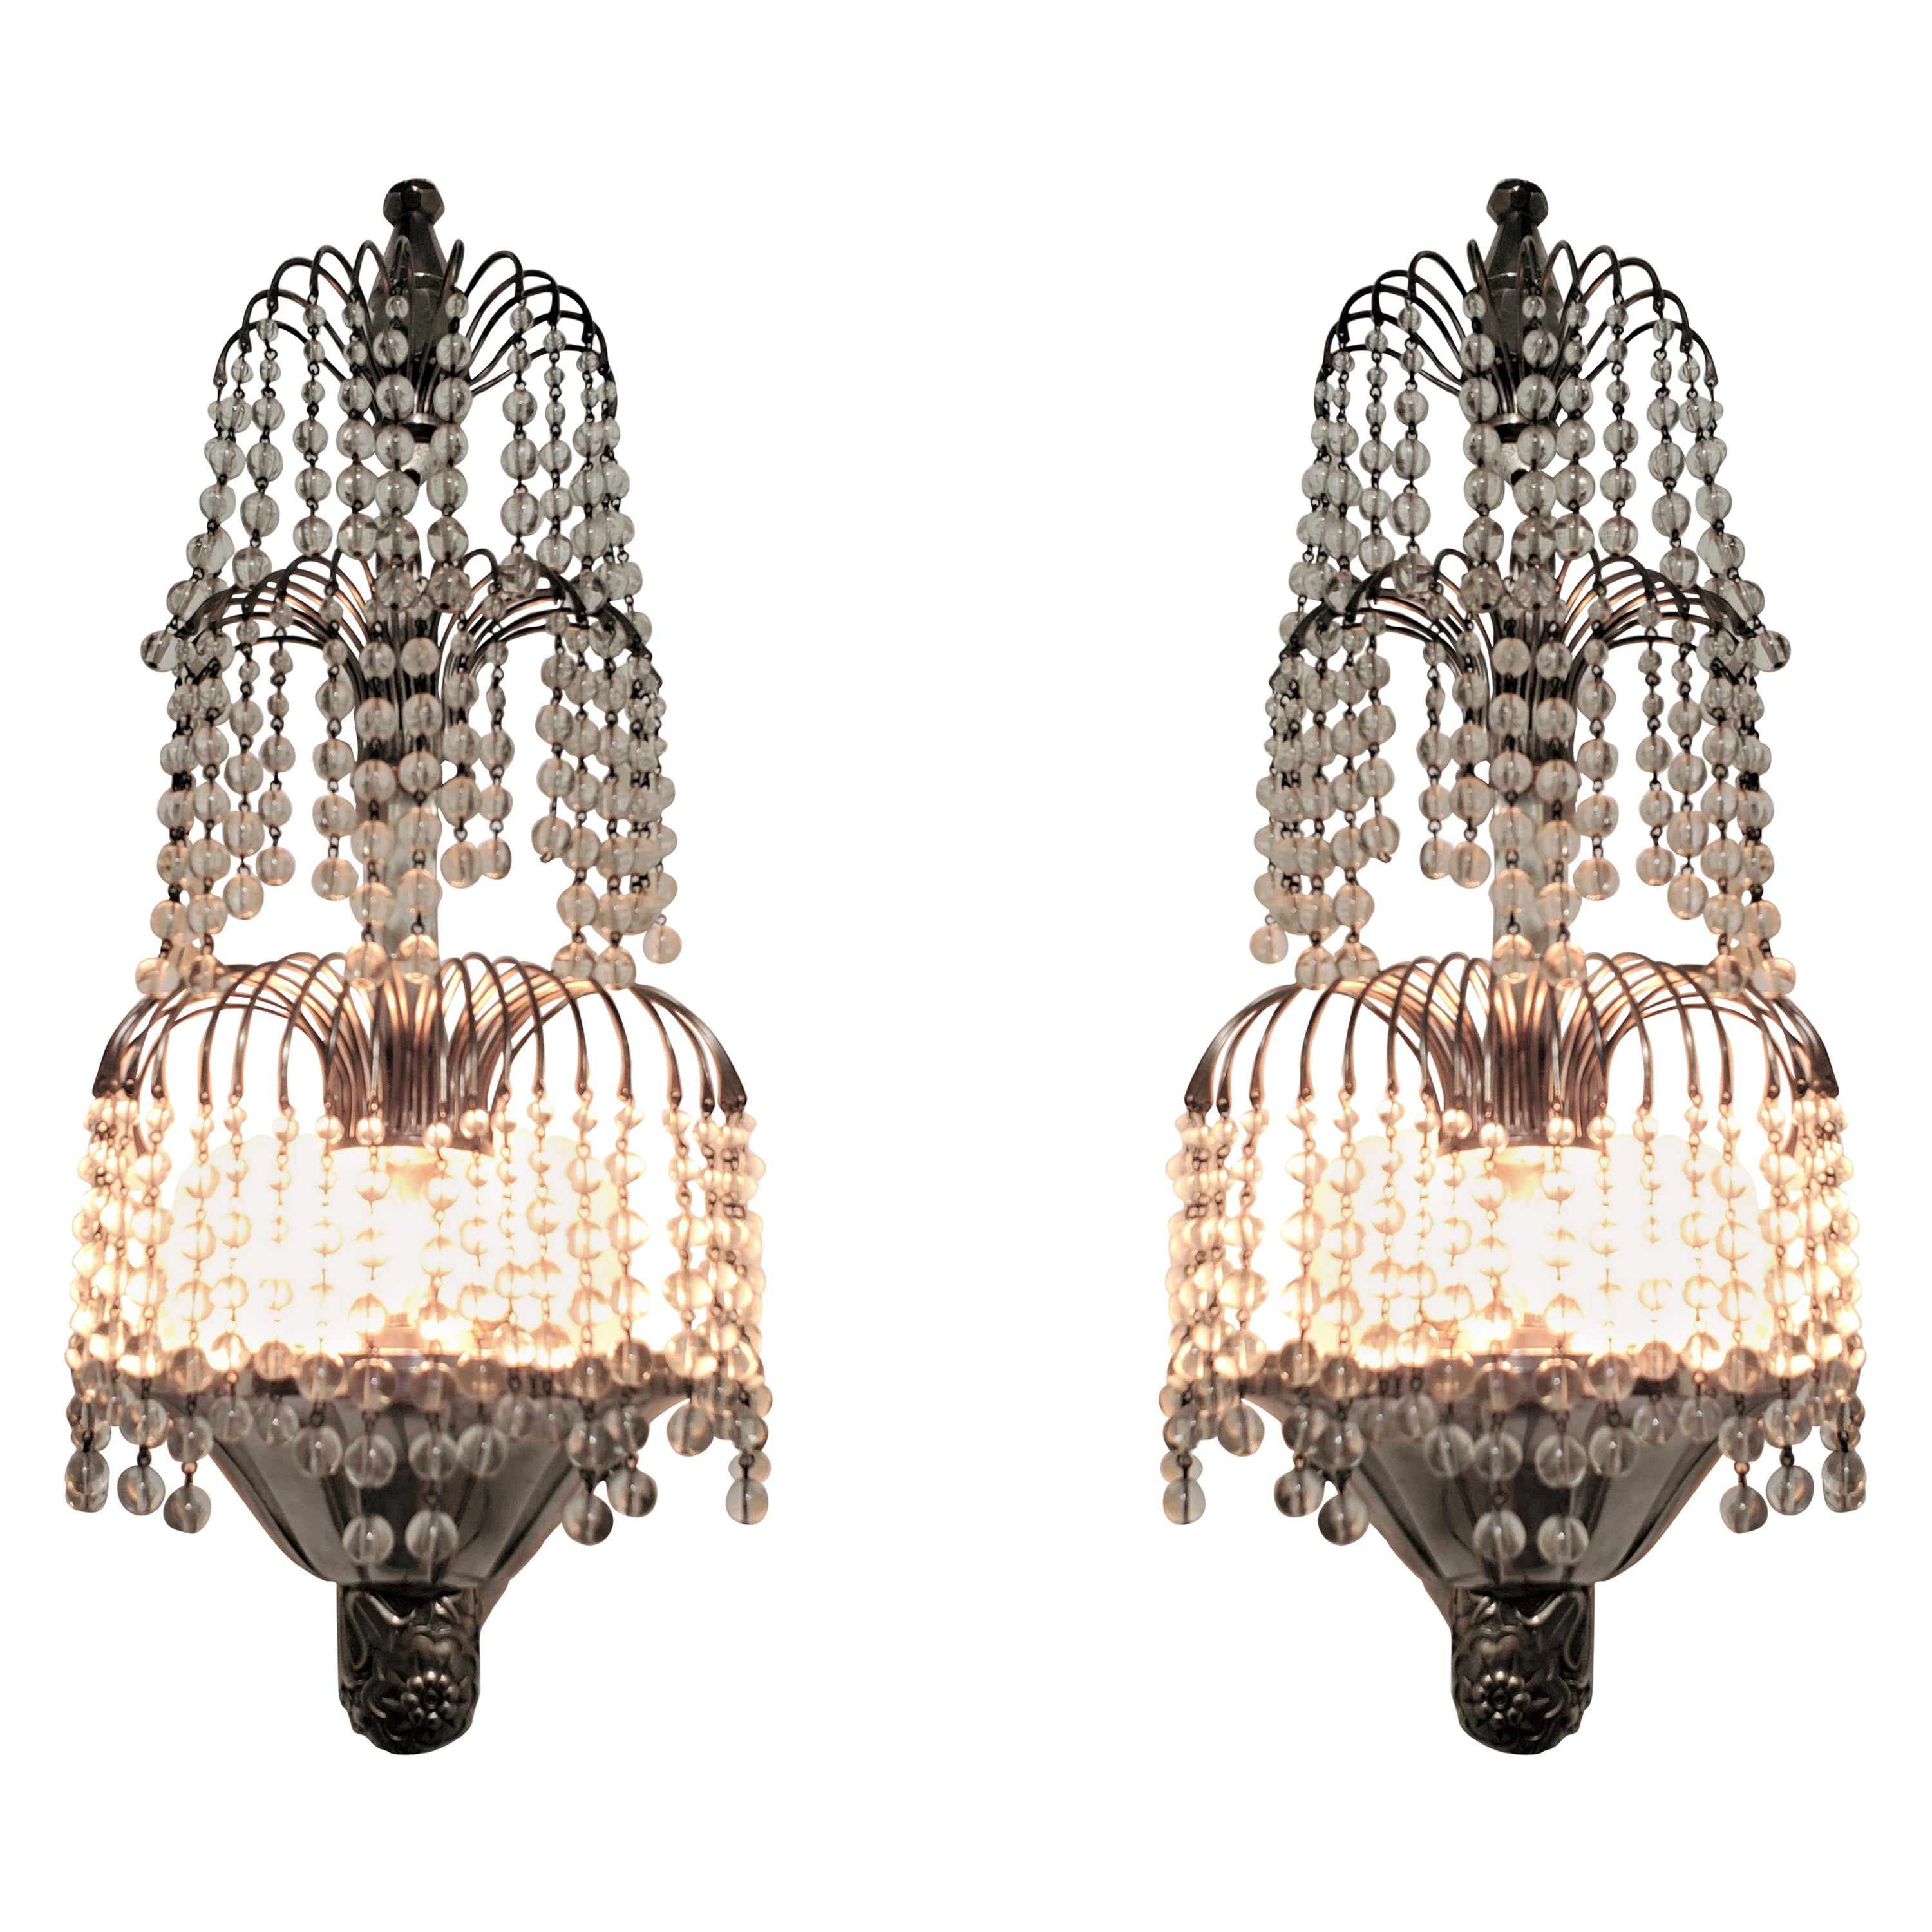 Pair of Tiered Crystal French Art Deco Wall Sconces Attrib to Sue et Mare For Sale